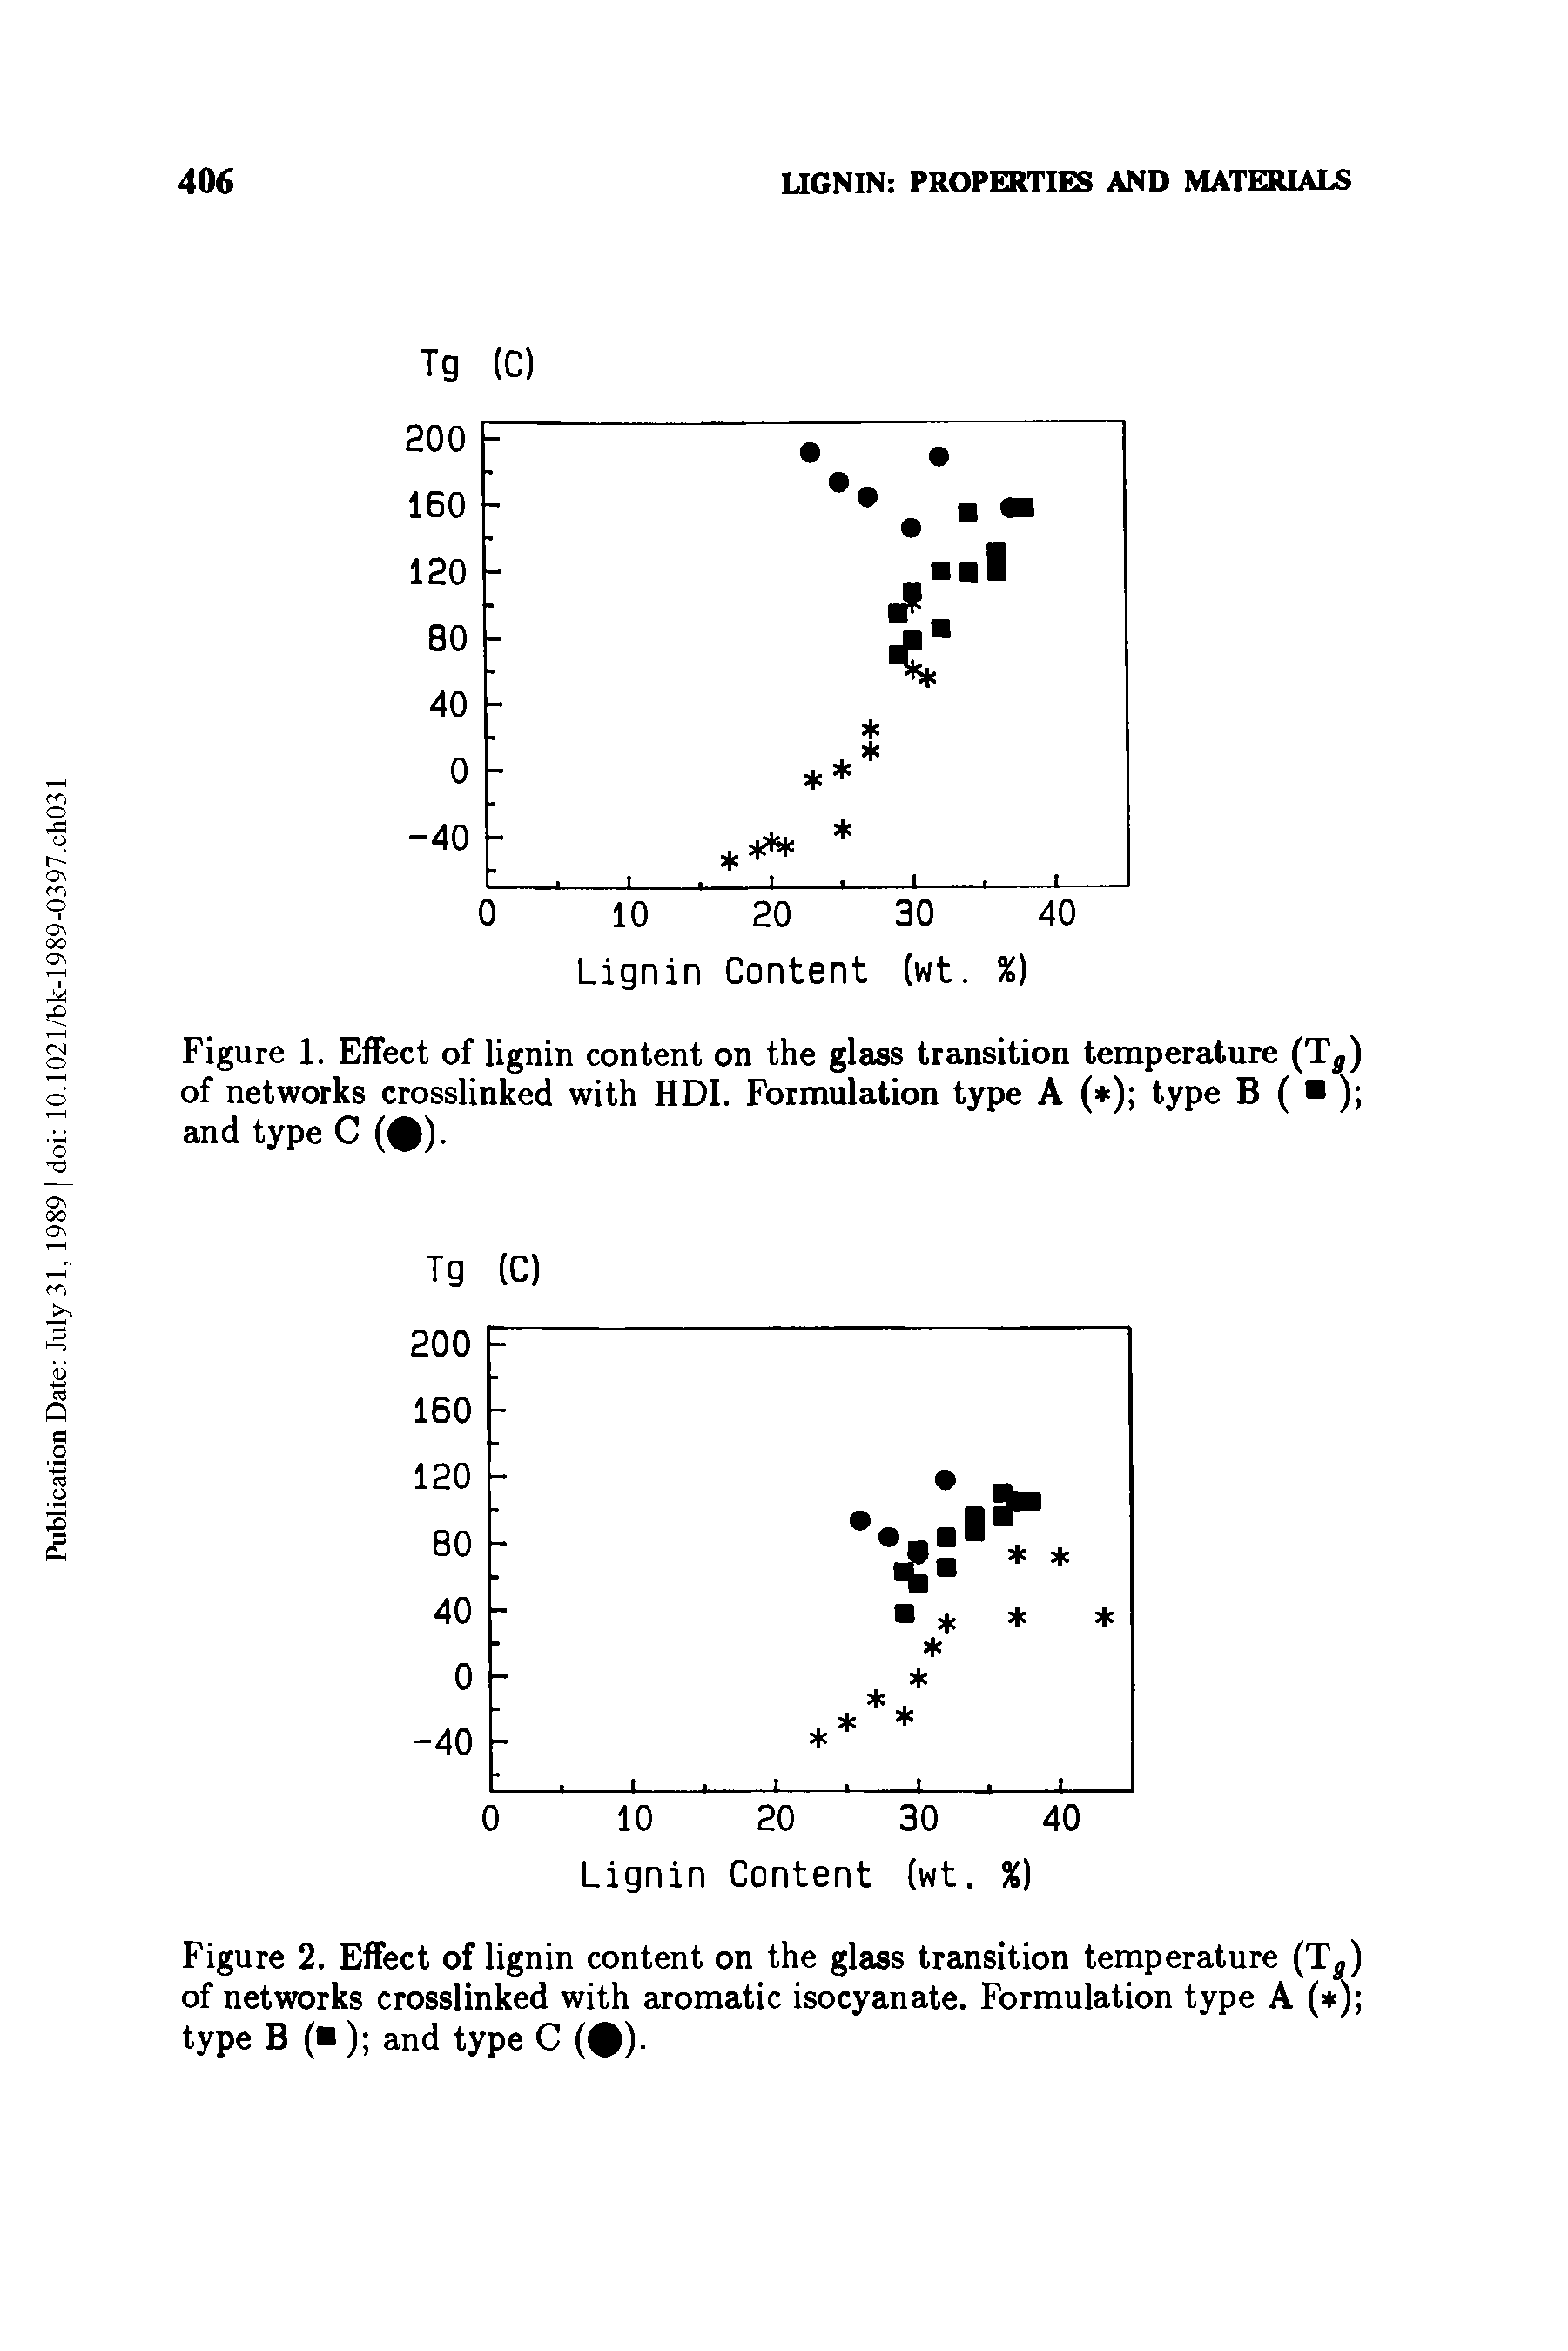 Figure 1. Effect of lignin content on the glass transition temperature (Ta) of networks crosslinked with HDI. Formulation type A ( ) type B ( ) and type C (0).